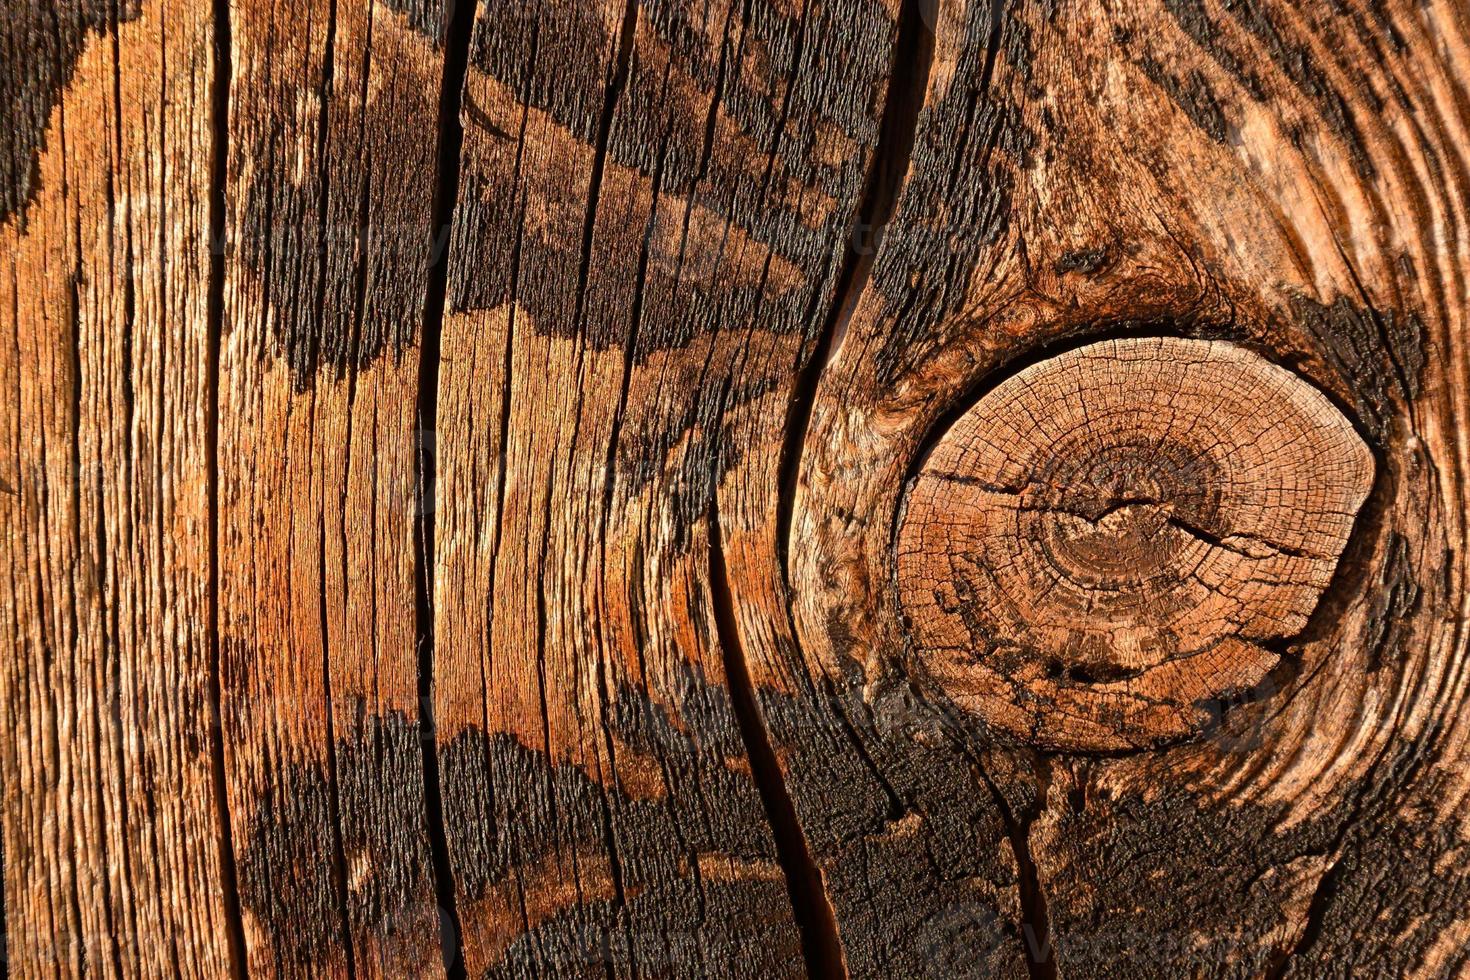 Wooden texture close-up photo